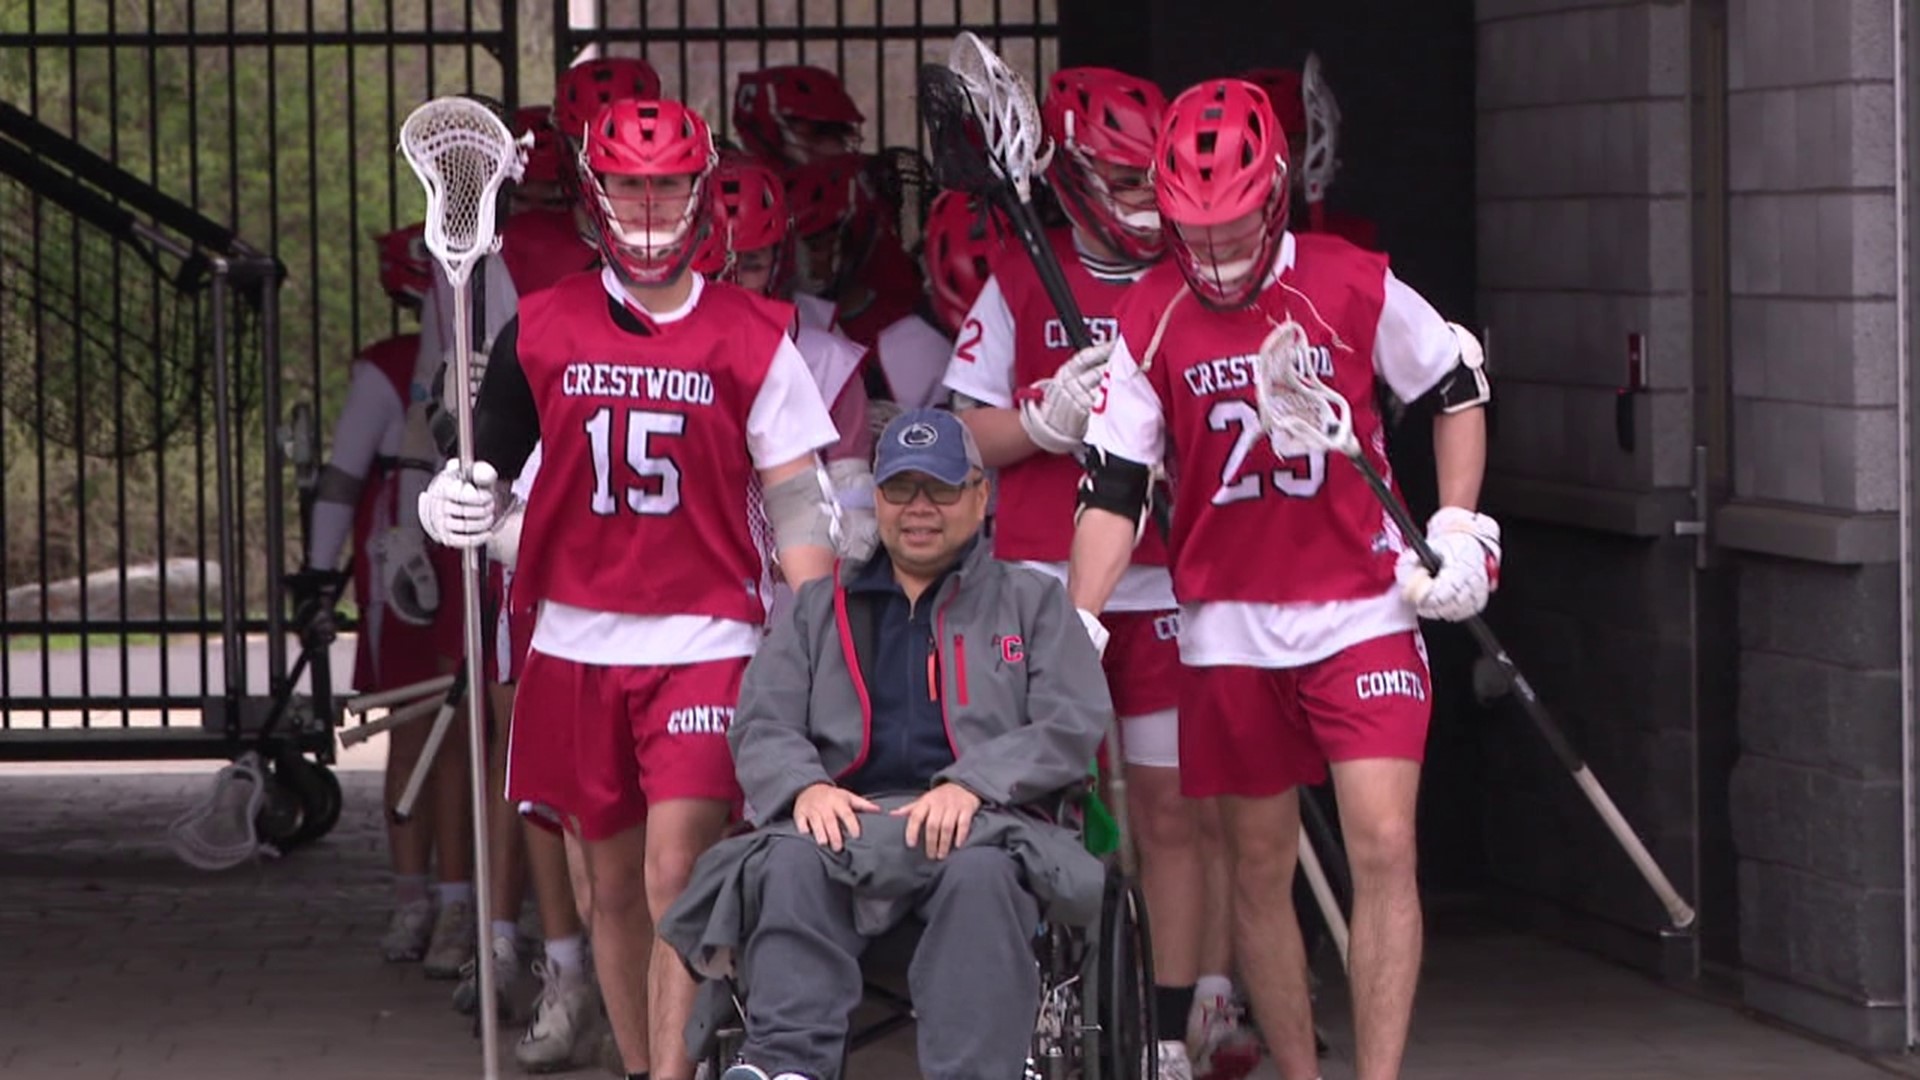 The Crestwood lacrosse team was all smiles when they saw their assistant coach, Roderick Delarosa, for the first time in weeks after undergoing rehab.